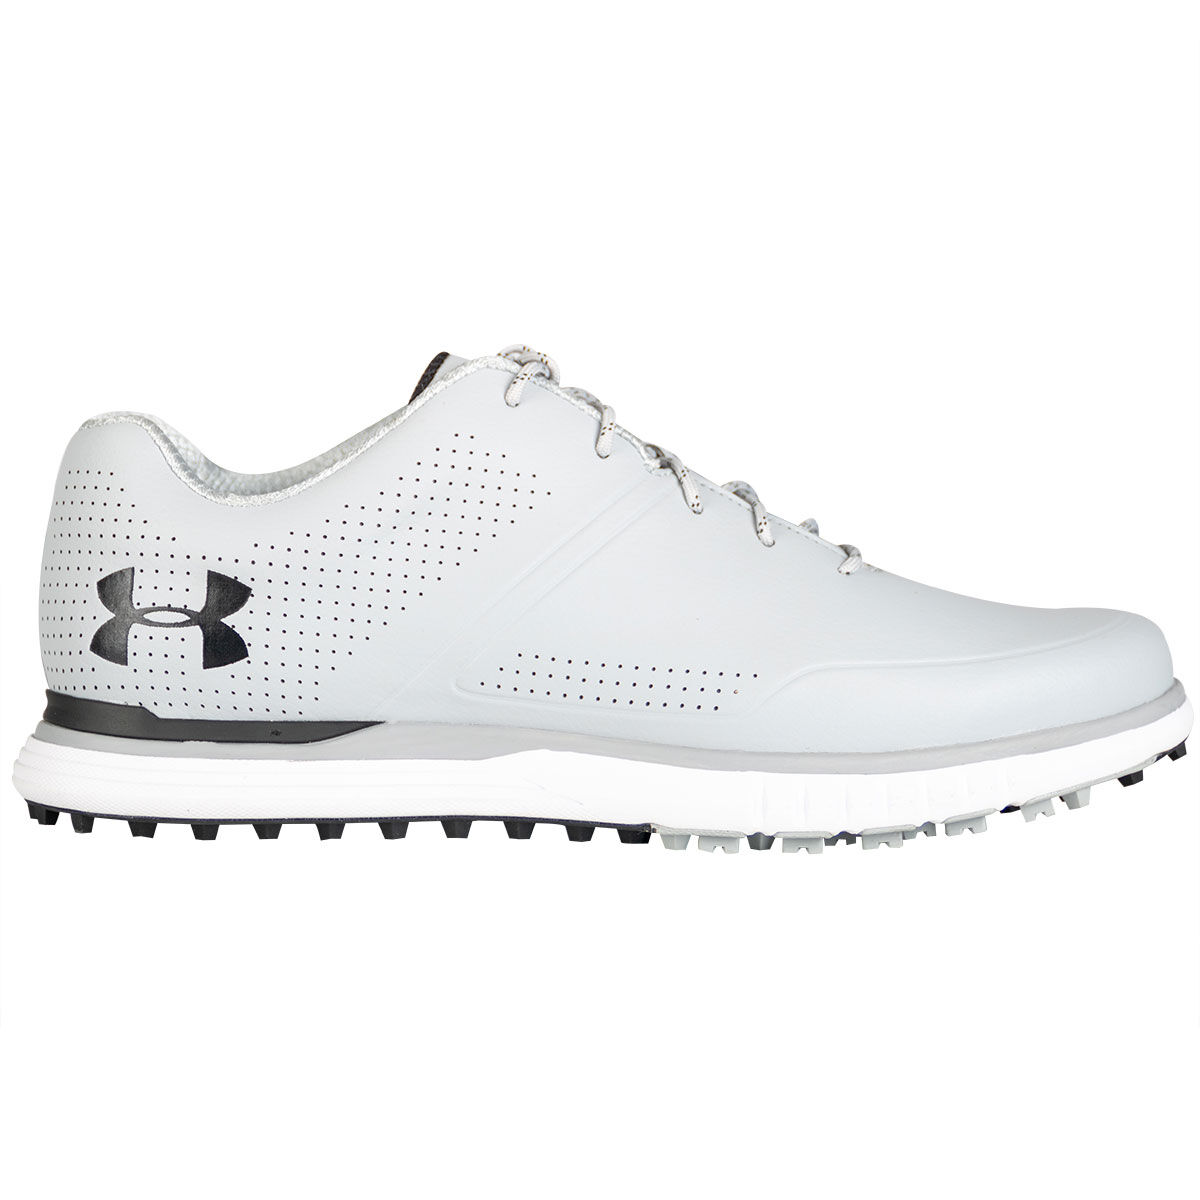 under armour golf shoes on sale